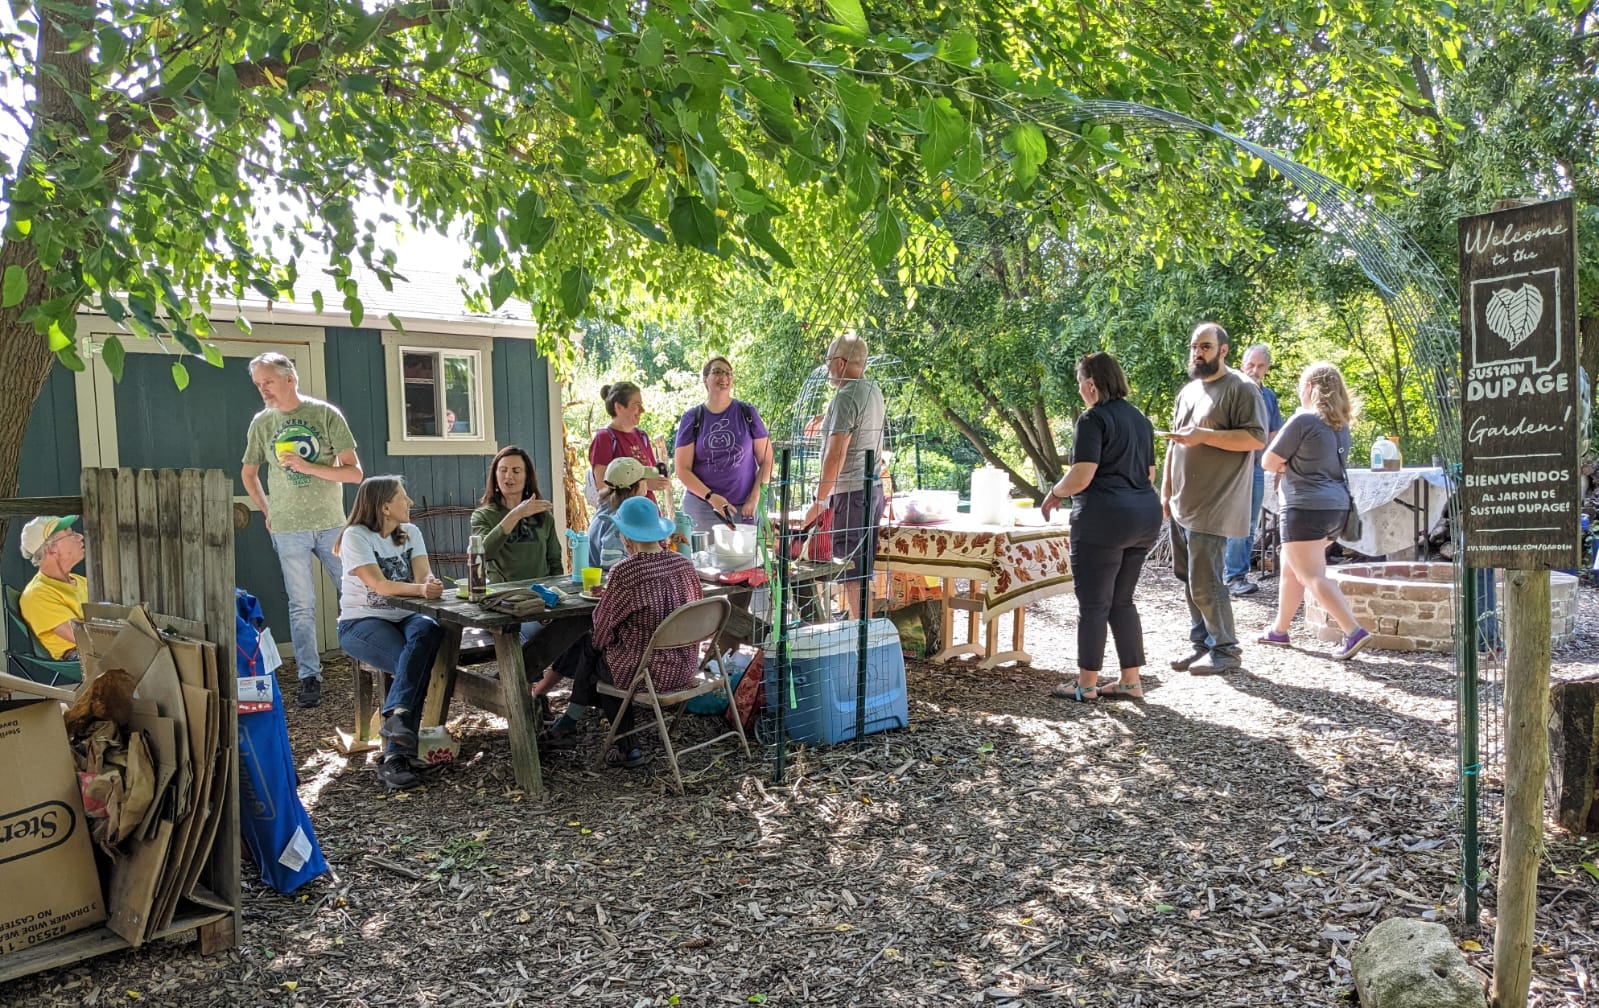 People gathered under the trees near the cabin, Enjoying treats and Community